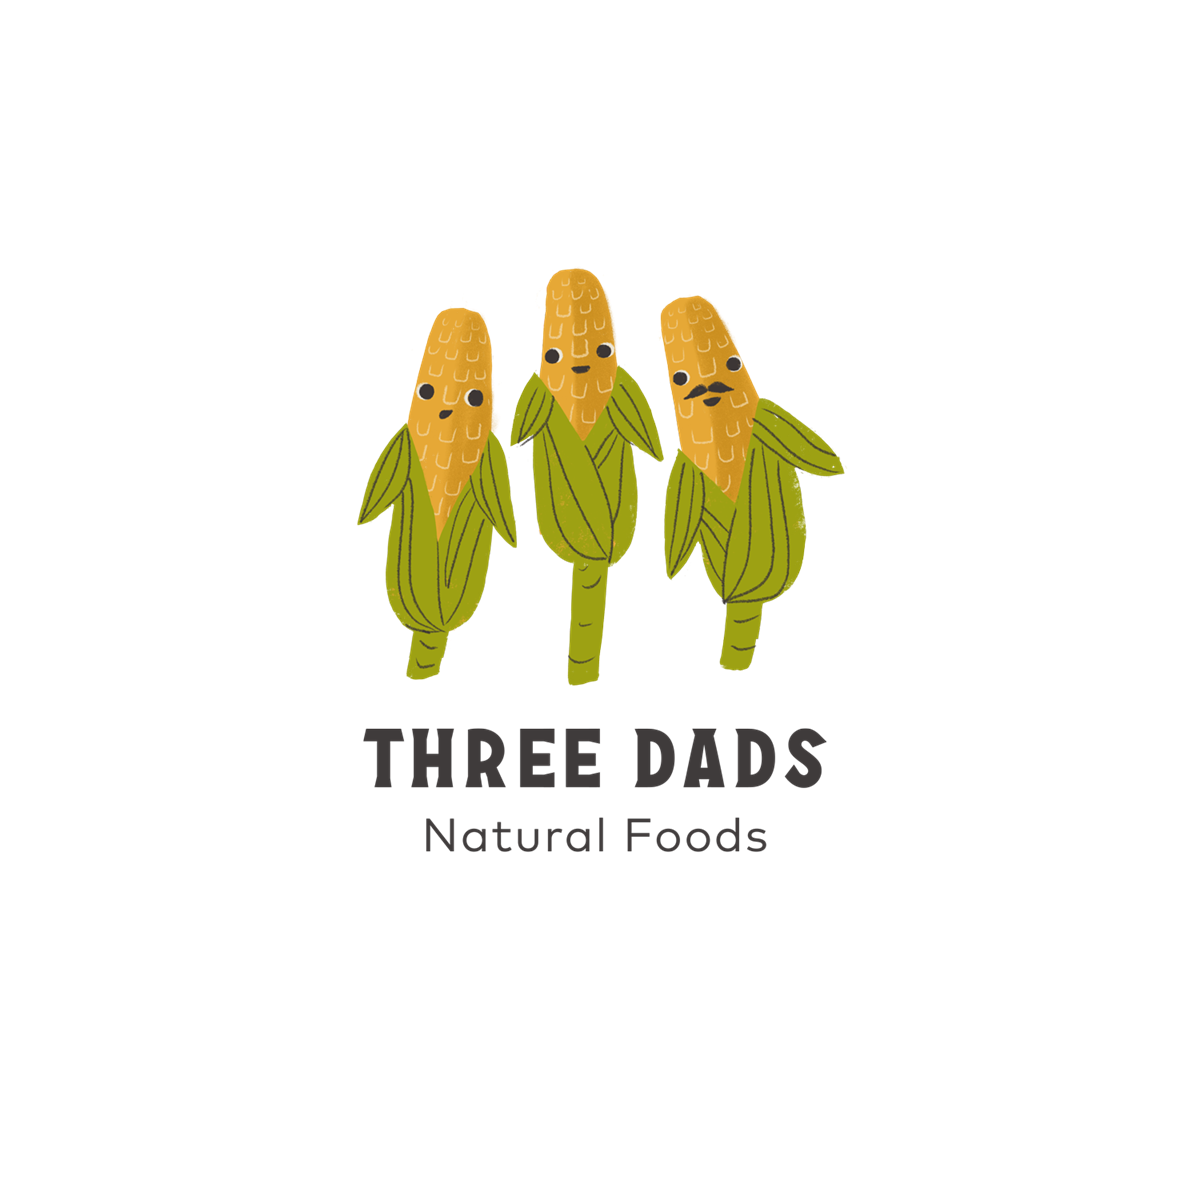 Three Dads Natural Foods